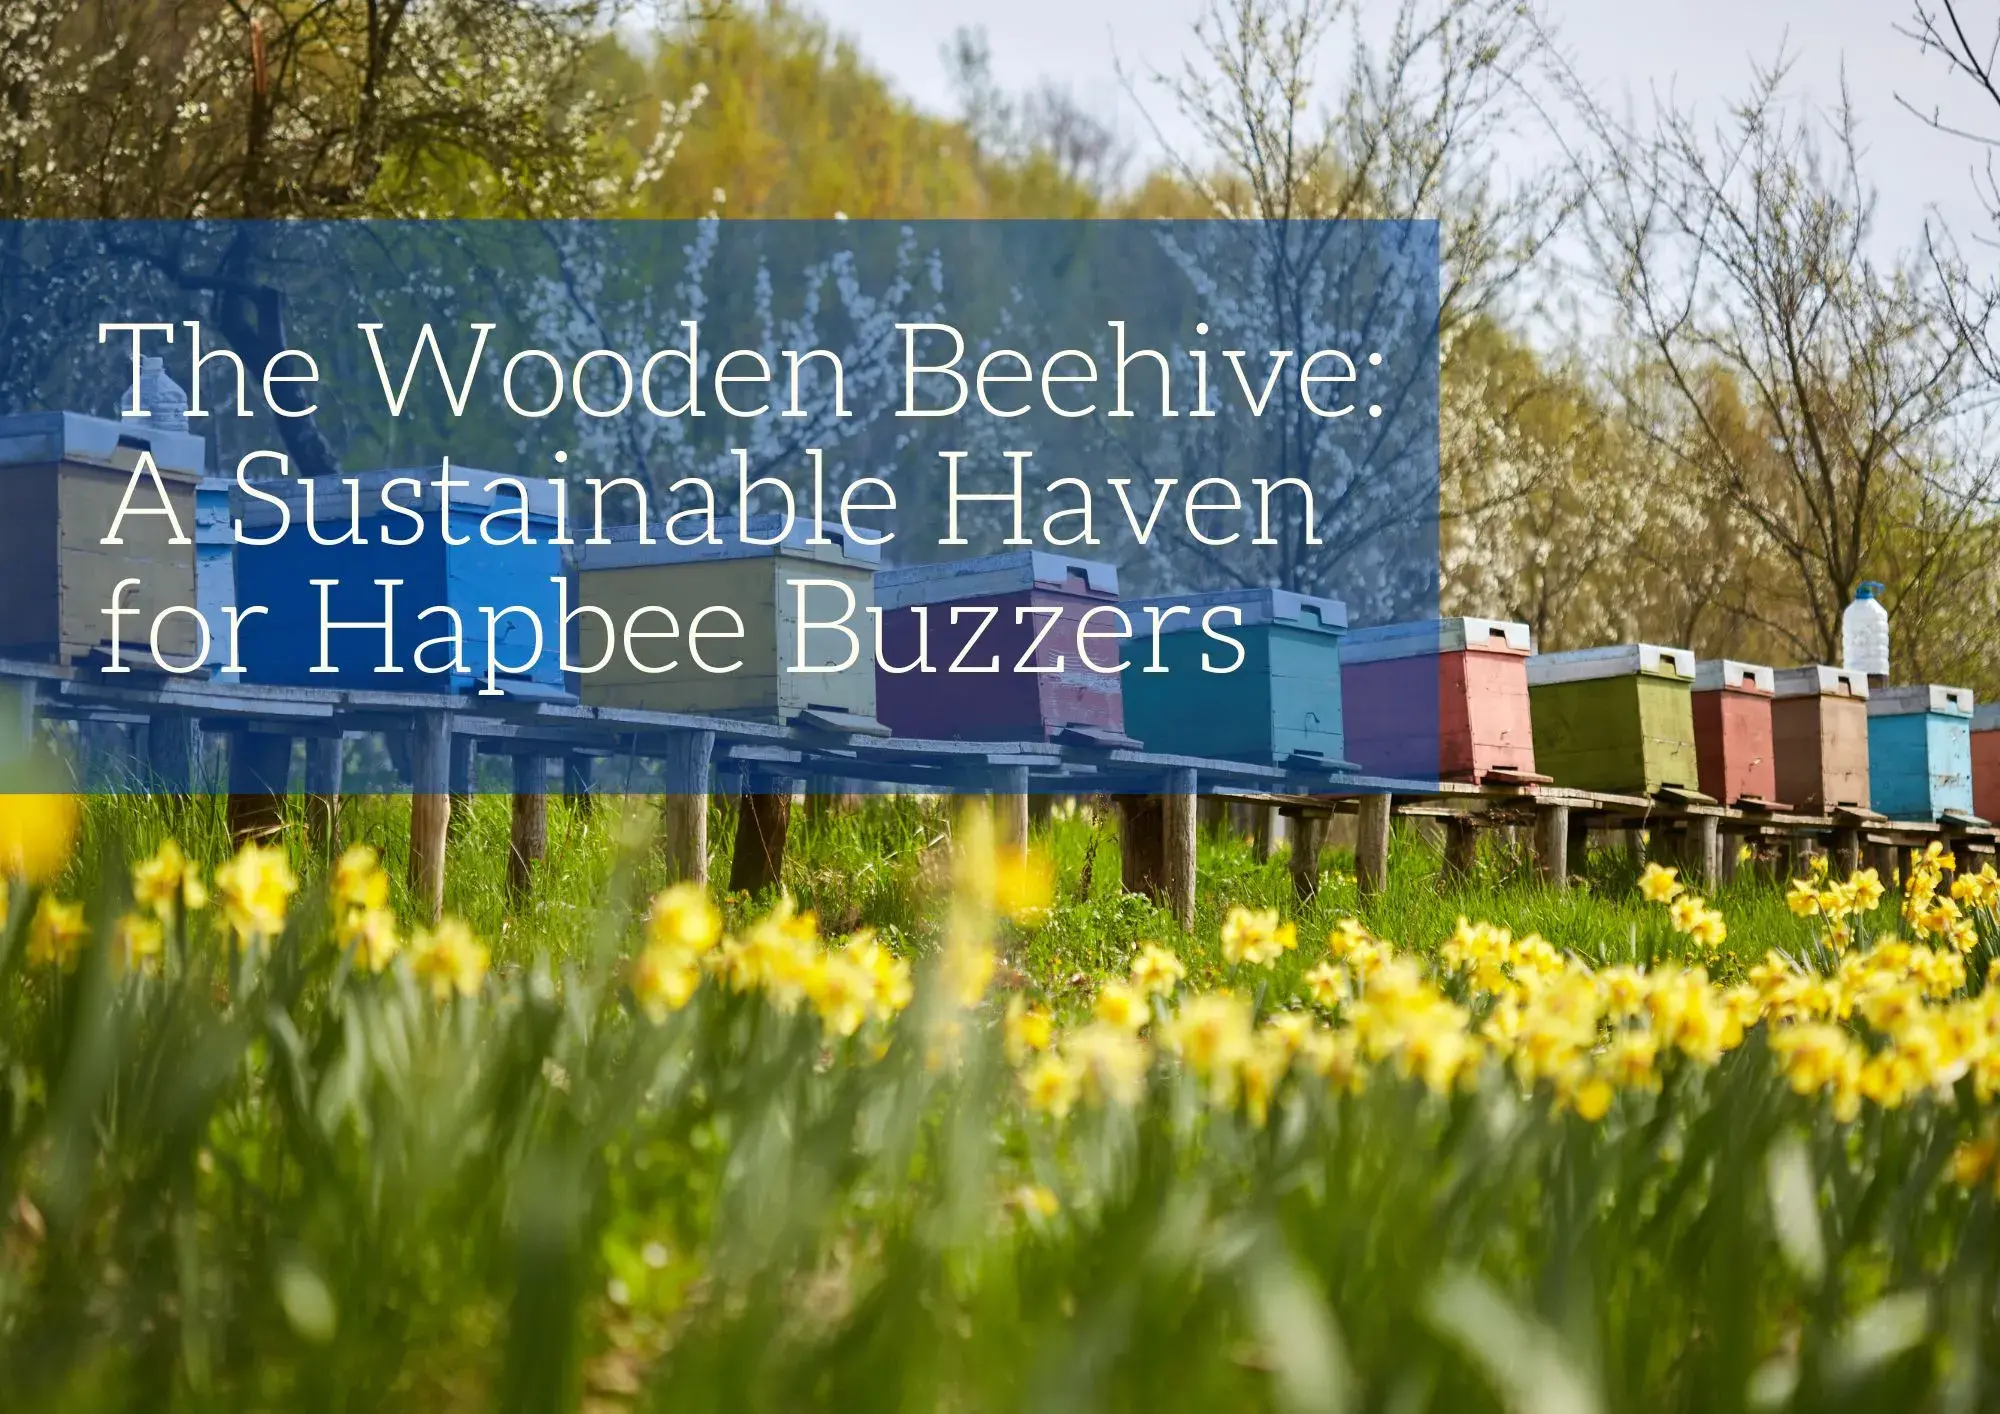 The Wooden Beehive